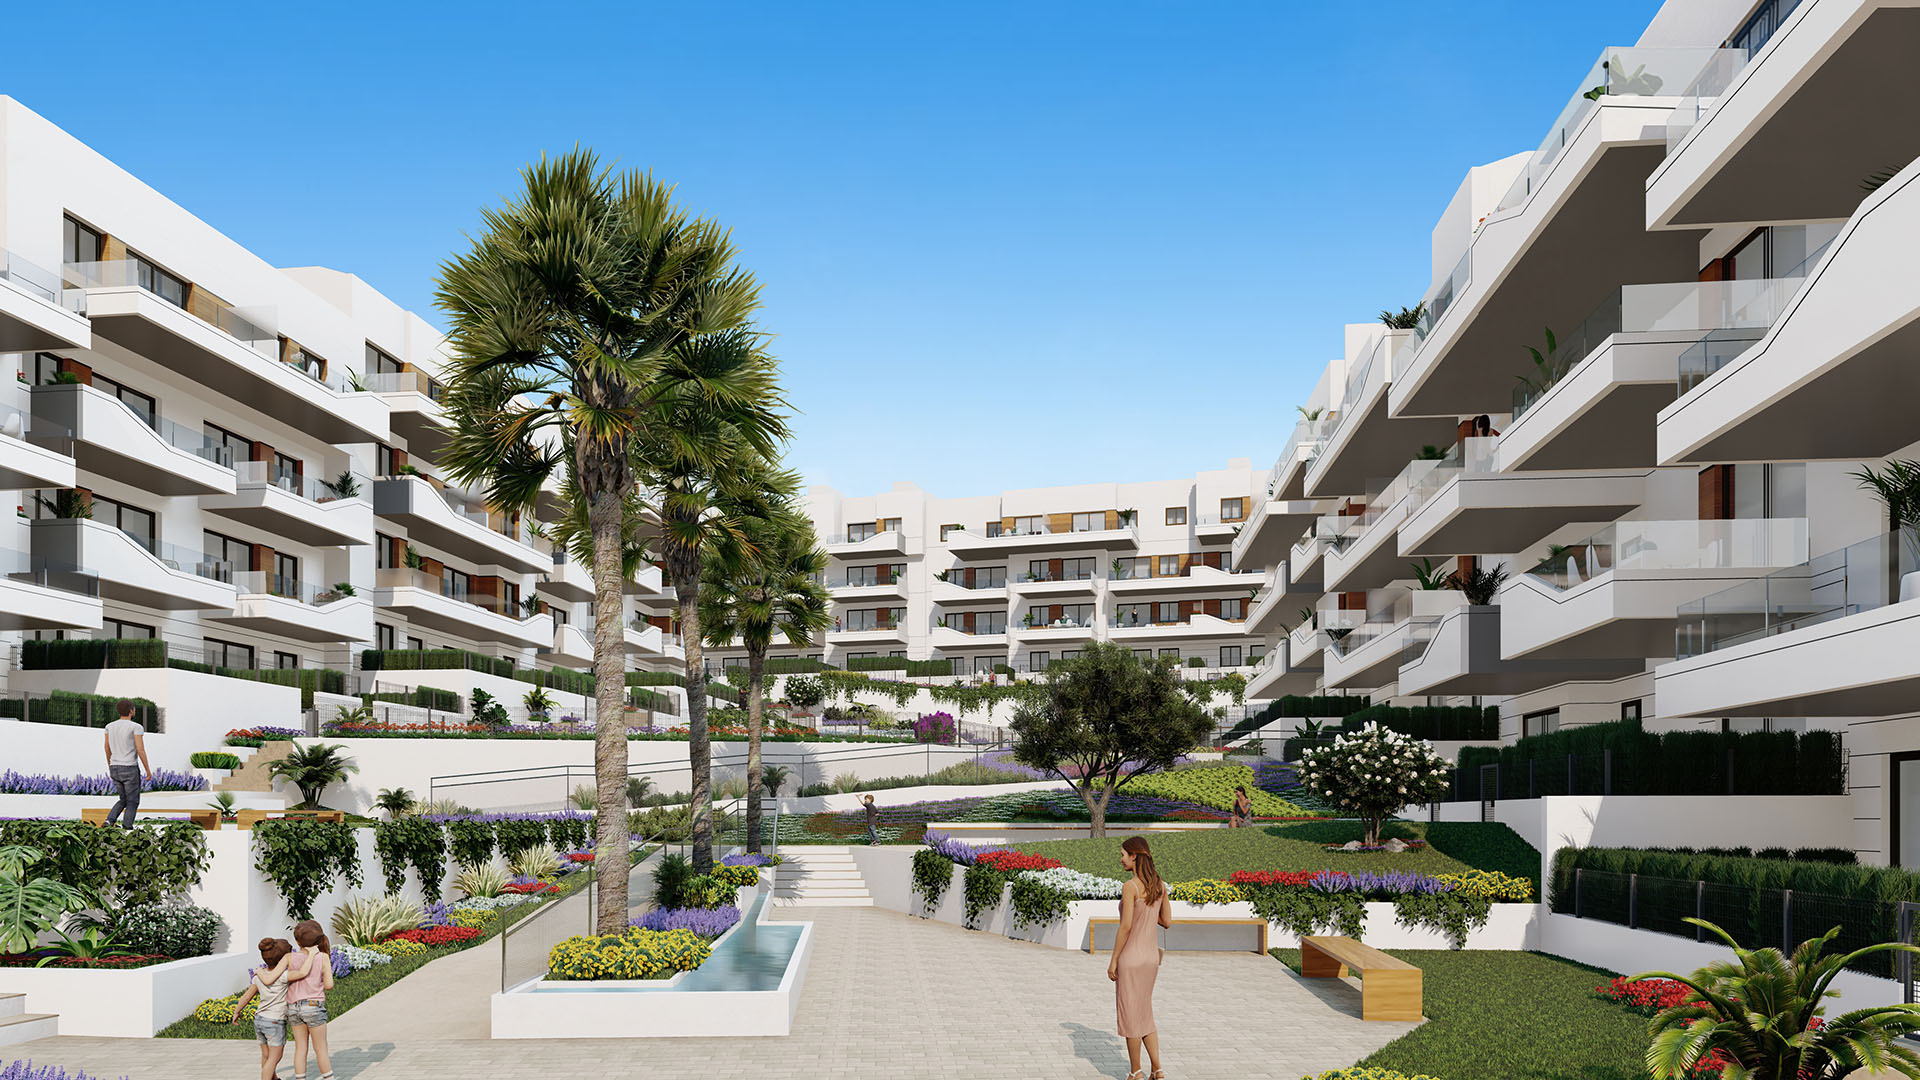 Apartment in Beach apartments in Villamartin with 2 or 3 bedrooms and community pools and large common areas 